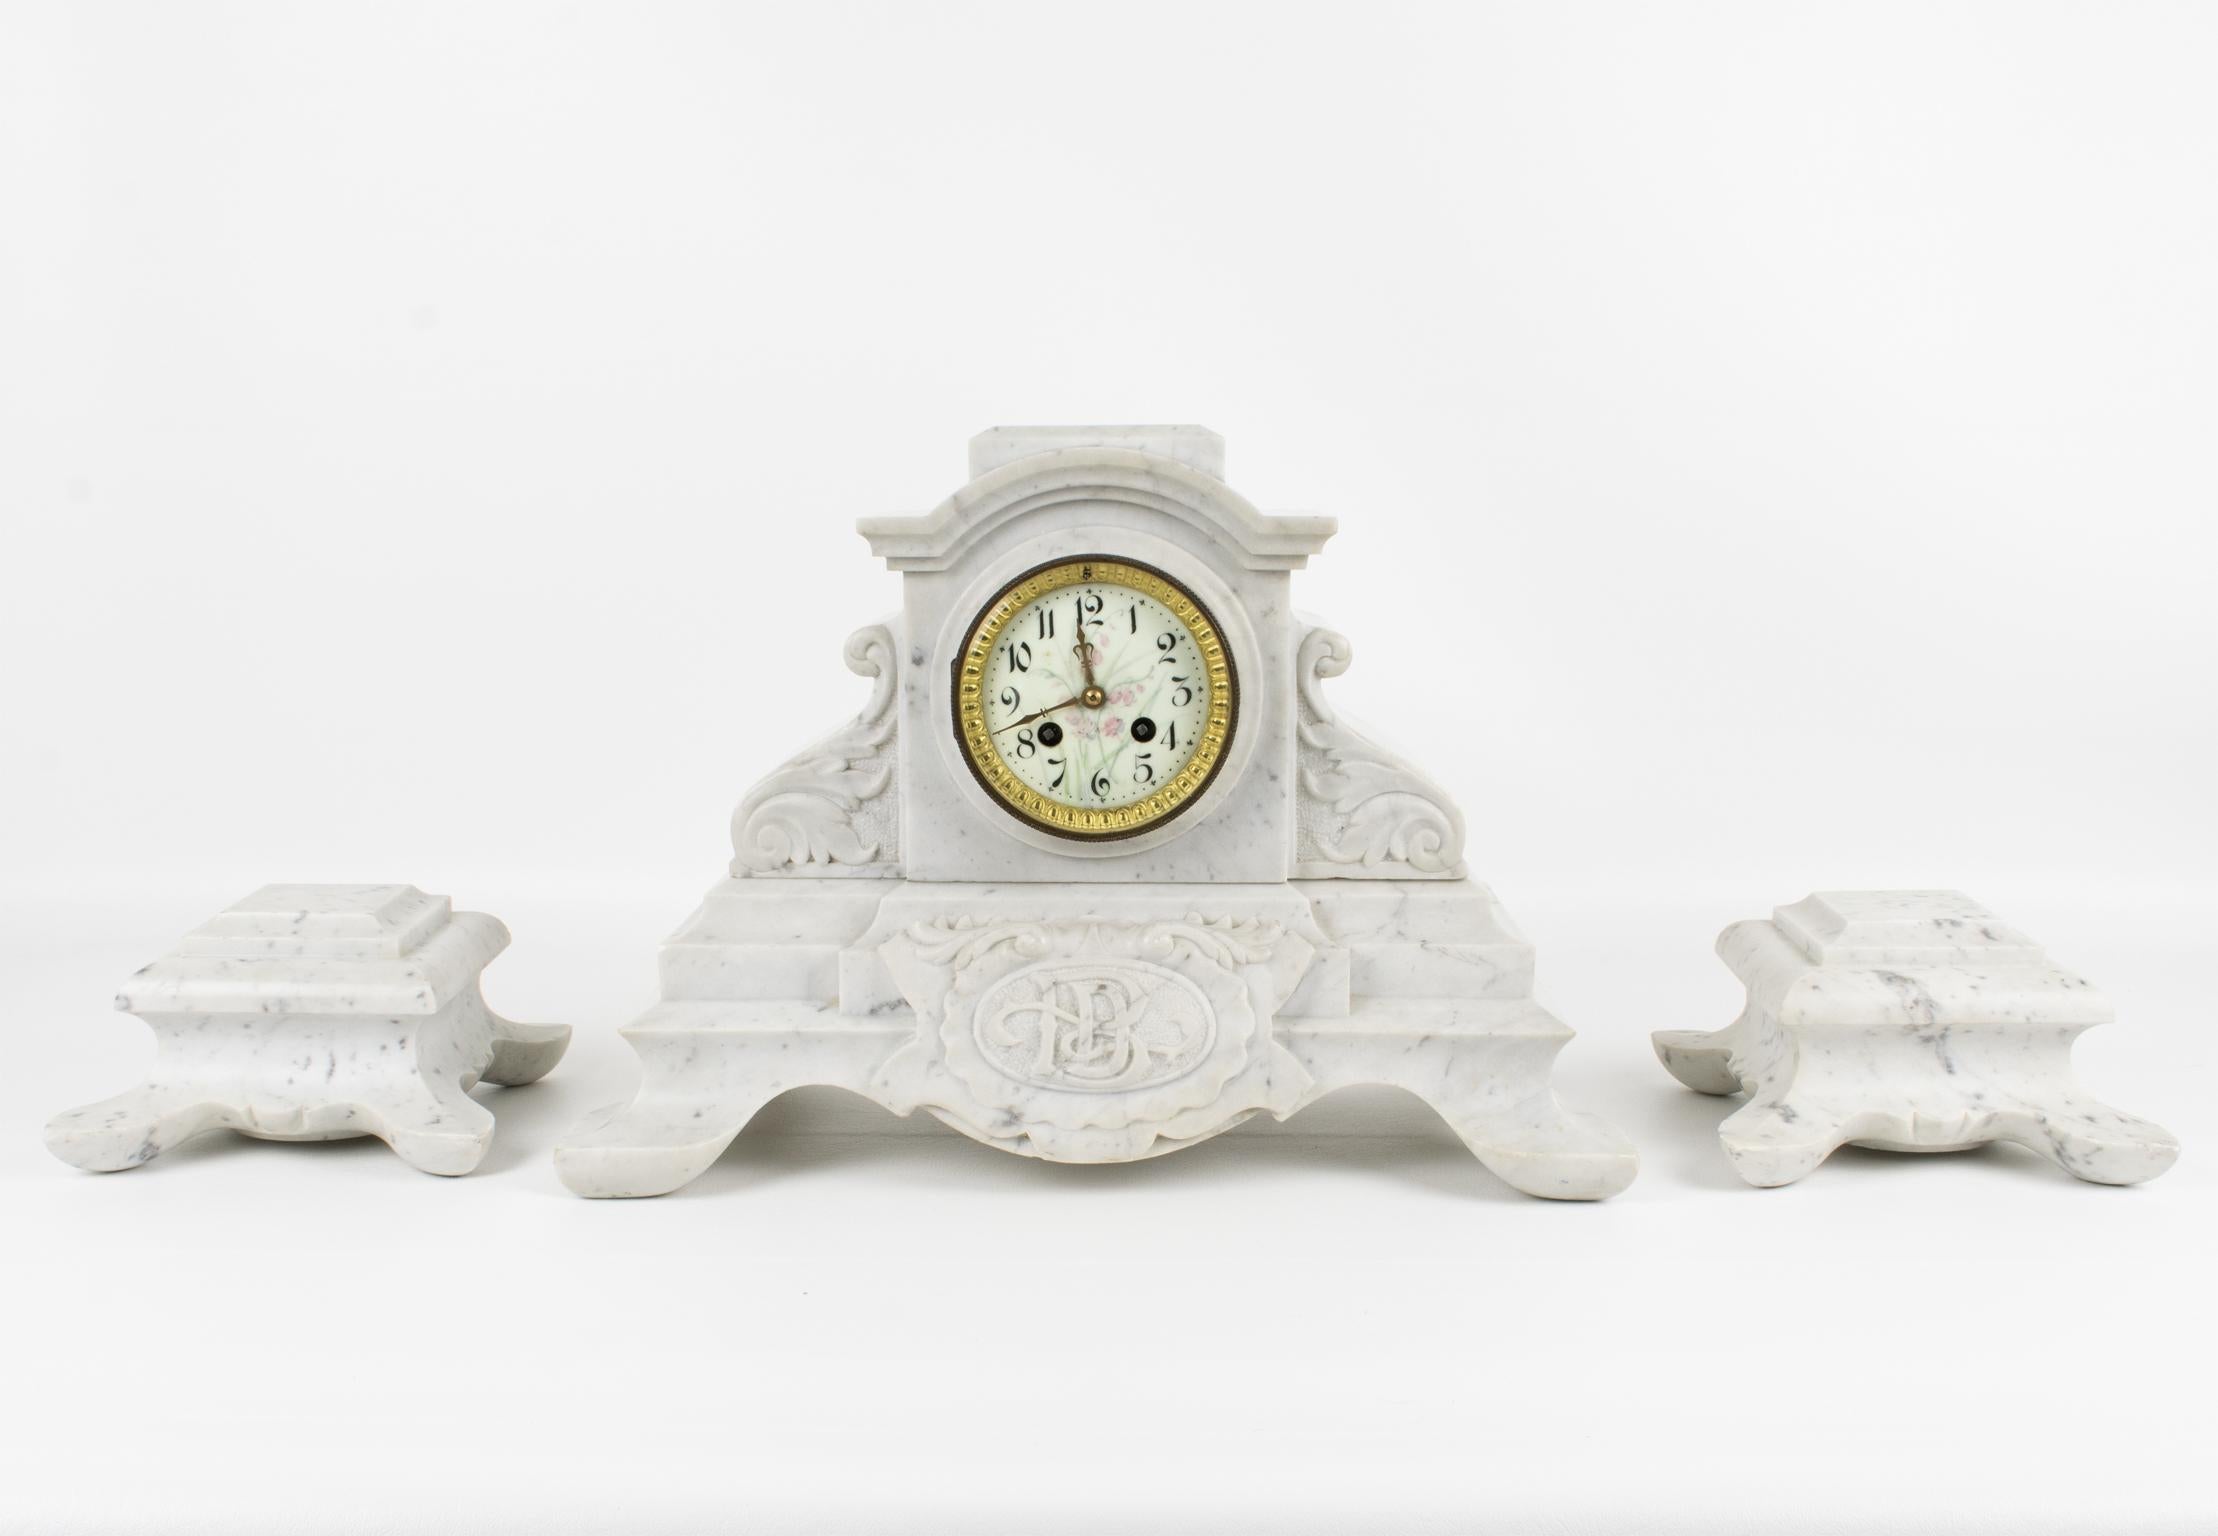 This exquisite 19th-century Napoleon III white Carrara marble mantel clock set by J. Bondat France is a stunning and rare timepiece of French craftsmanship. The set is hand-carved with a neo-classic geometric design and intricate acanthus leaves